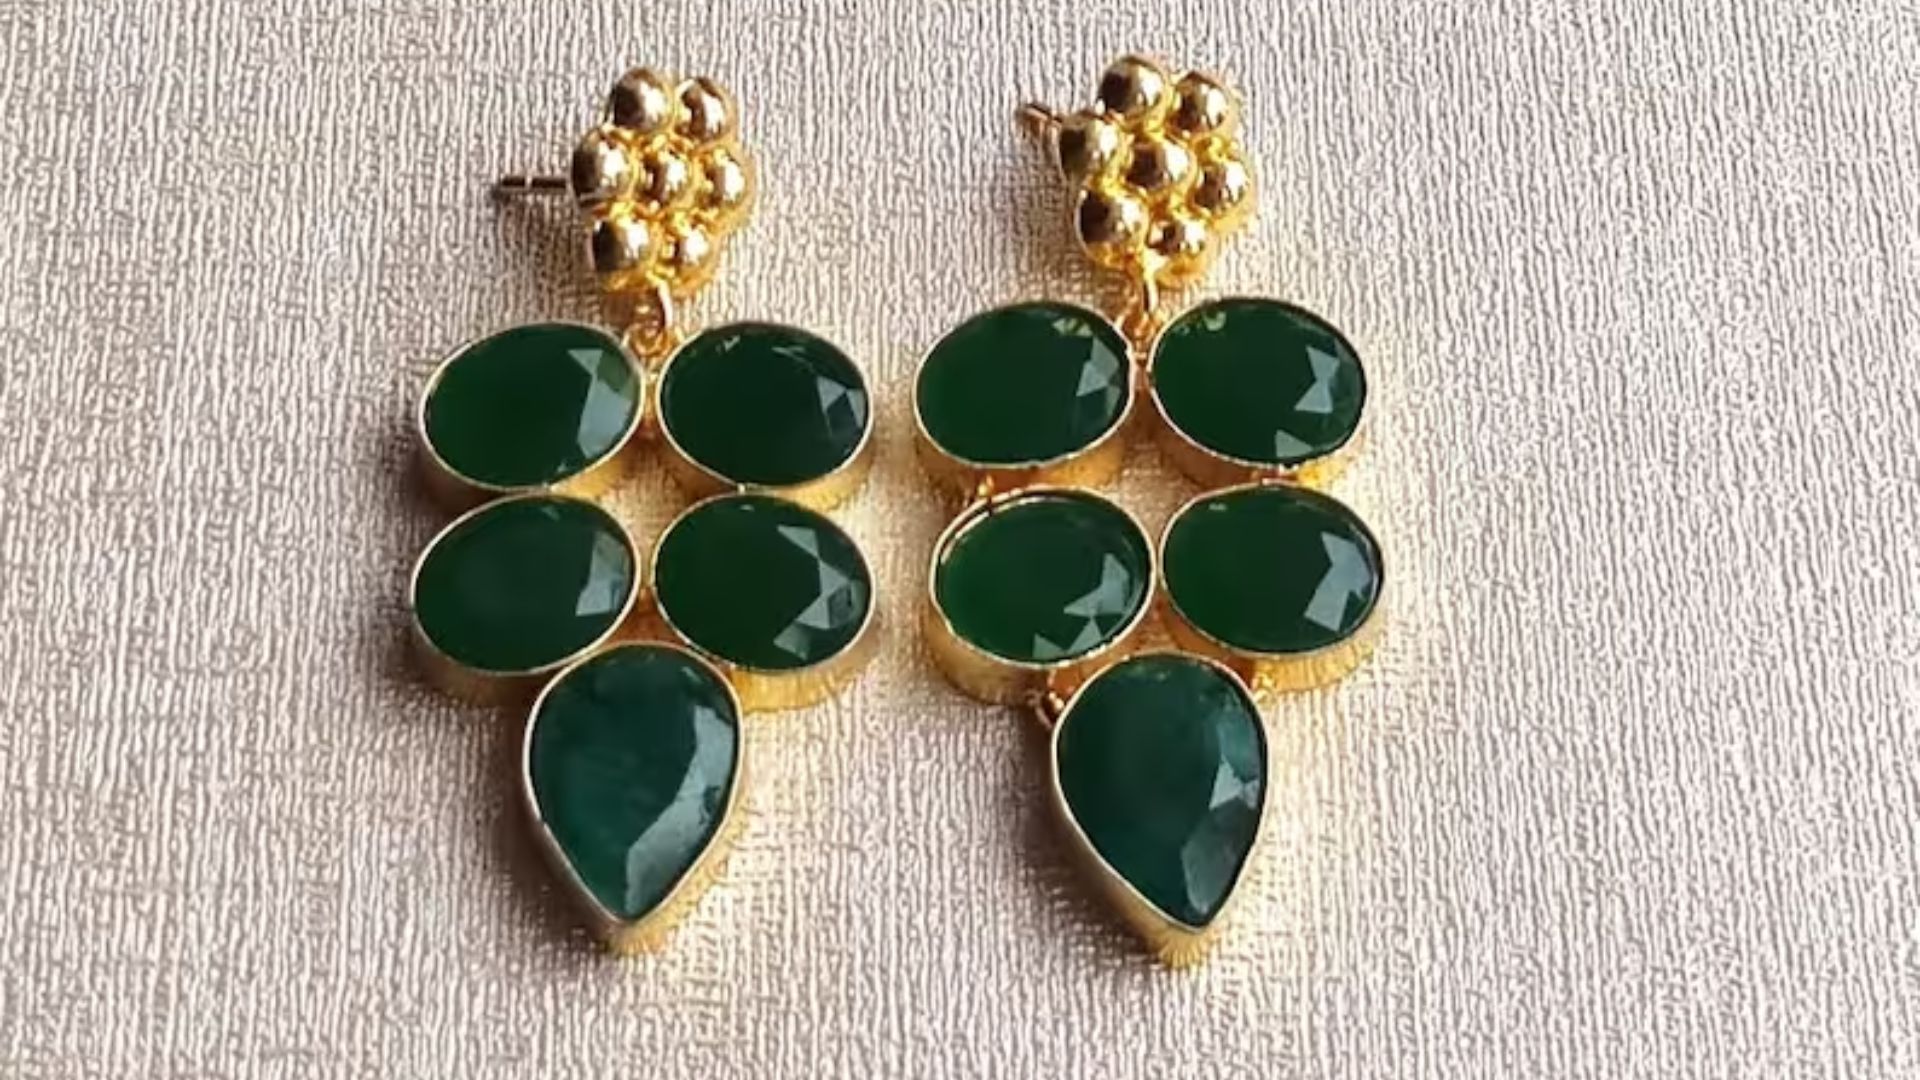 5 Reasons Why Handcrafted Semi-Precious Stone Earrings Are a Must-Have